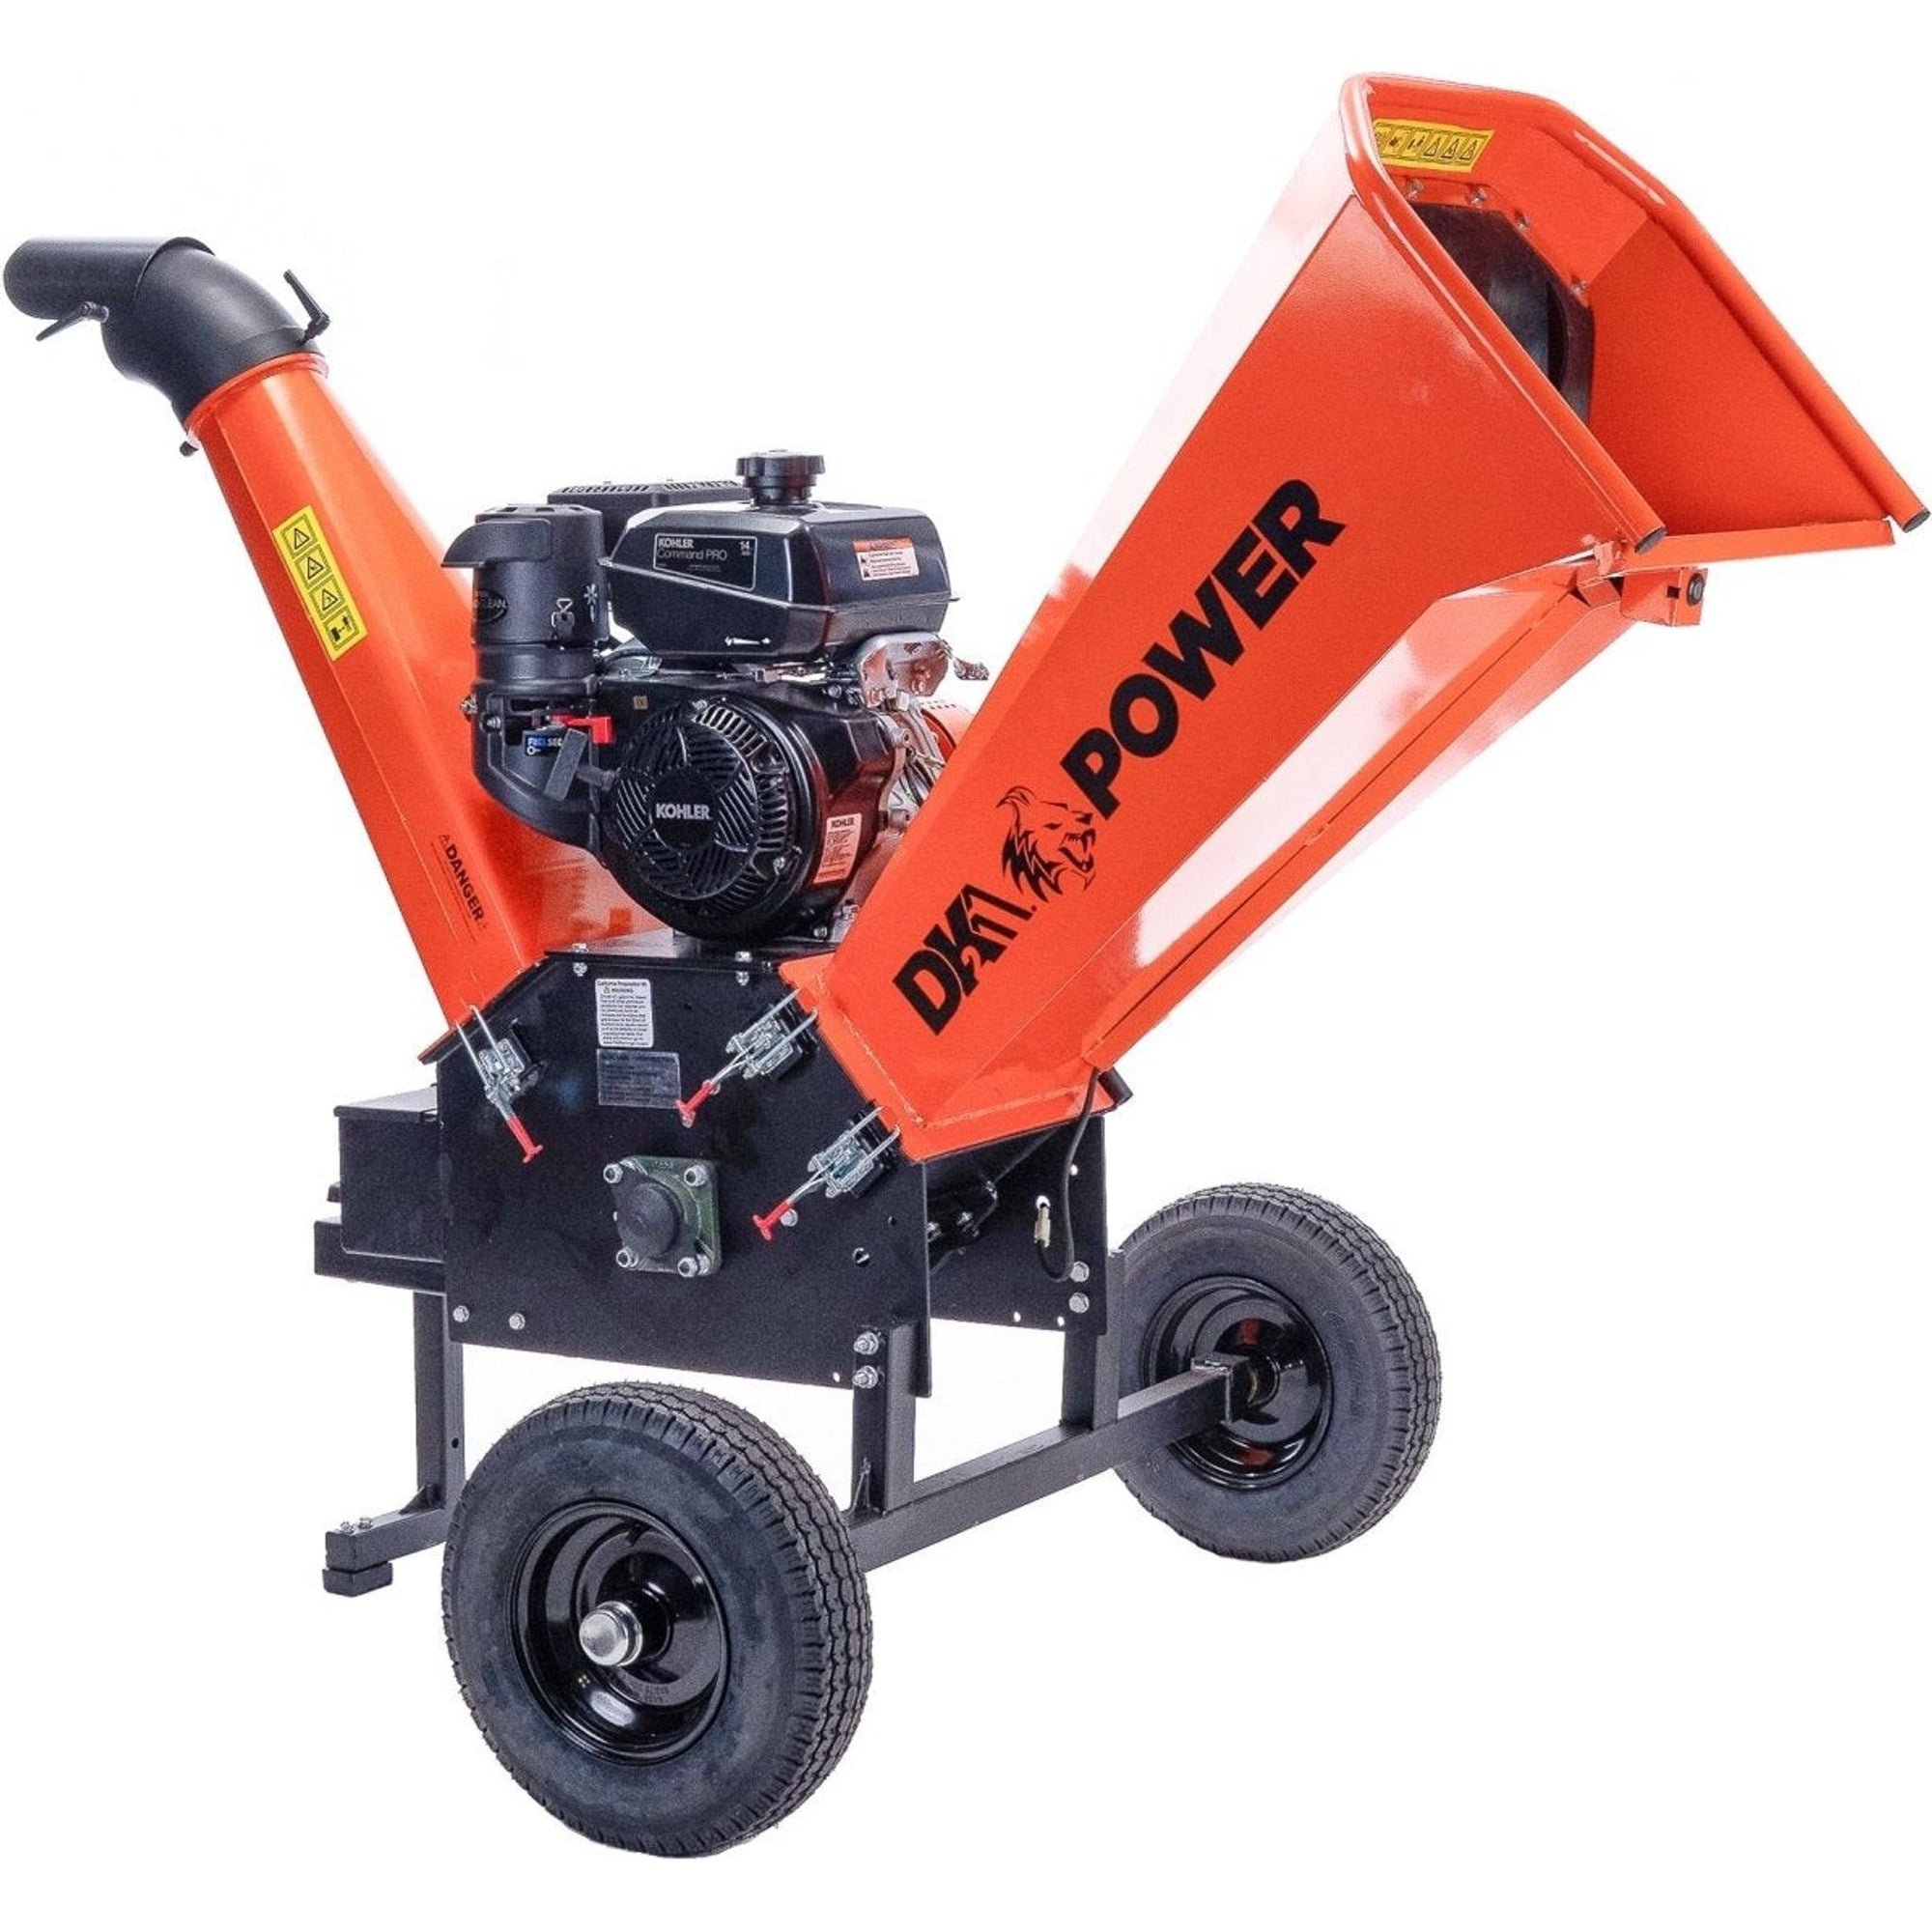 DK2 6 IN. D.O.T. 14 hp kohler electric start commercial 3600 rpm cyclonic chipper shredder, 12 inch cutting blades with d.o.t. road legal tires and 48 in. extended wheel axle. - Prime Yard Tools